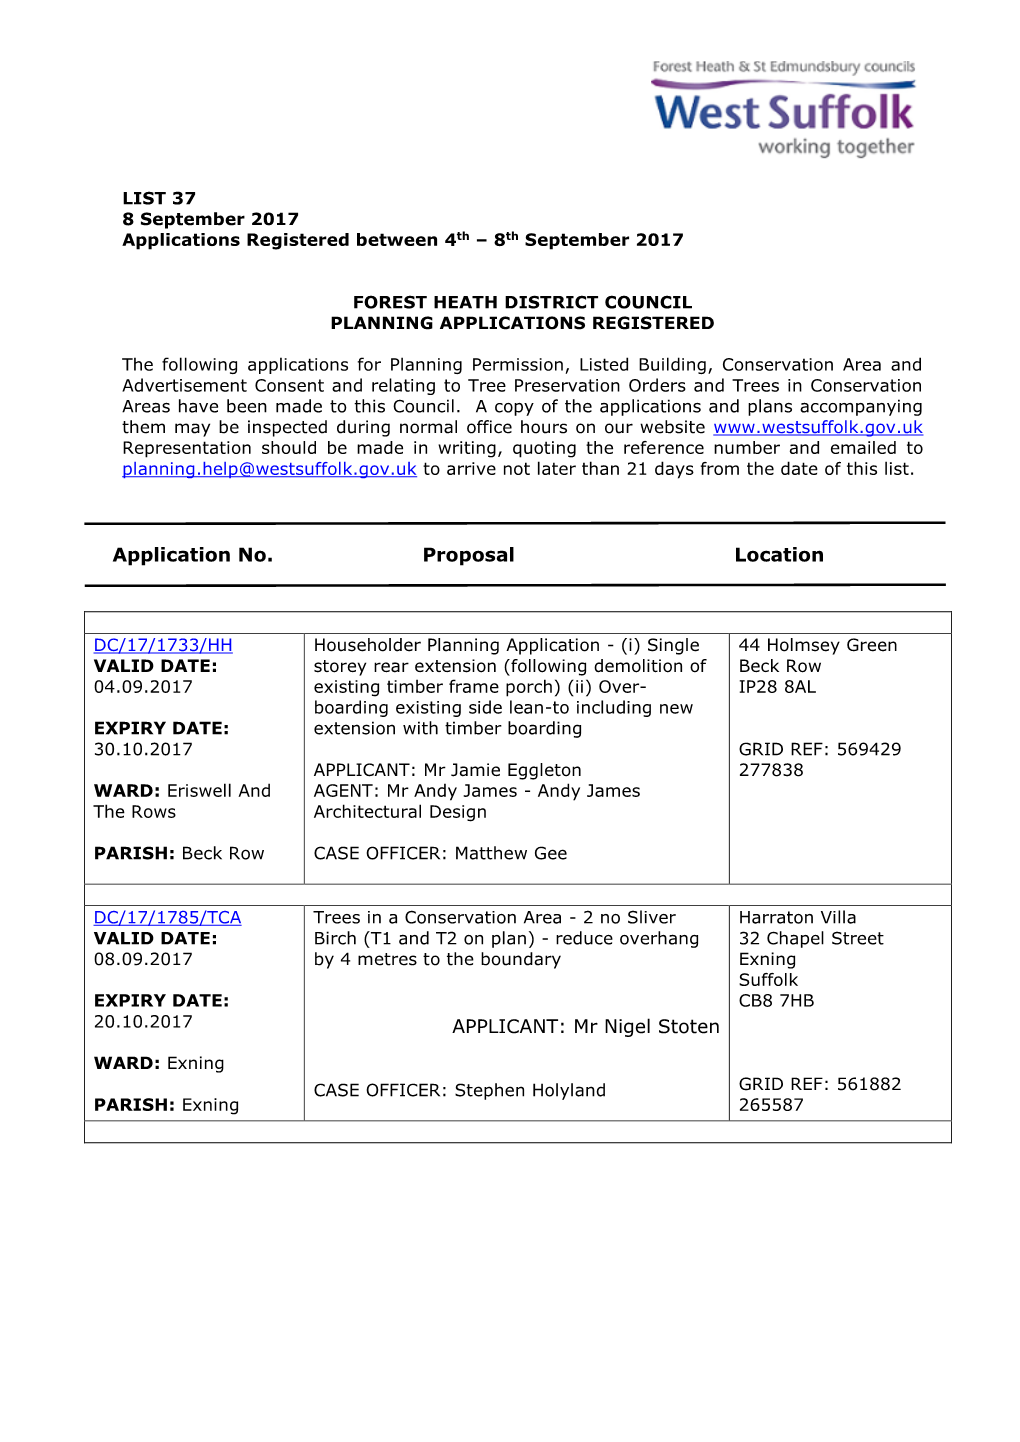 FHDC Planning Applications 37/17